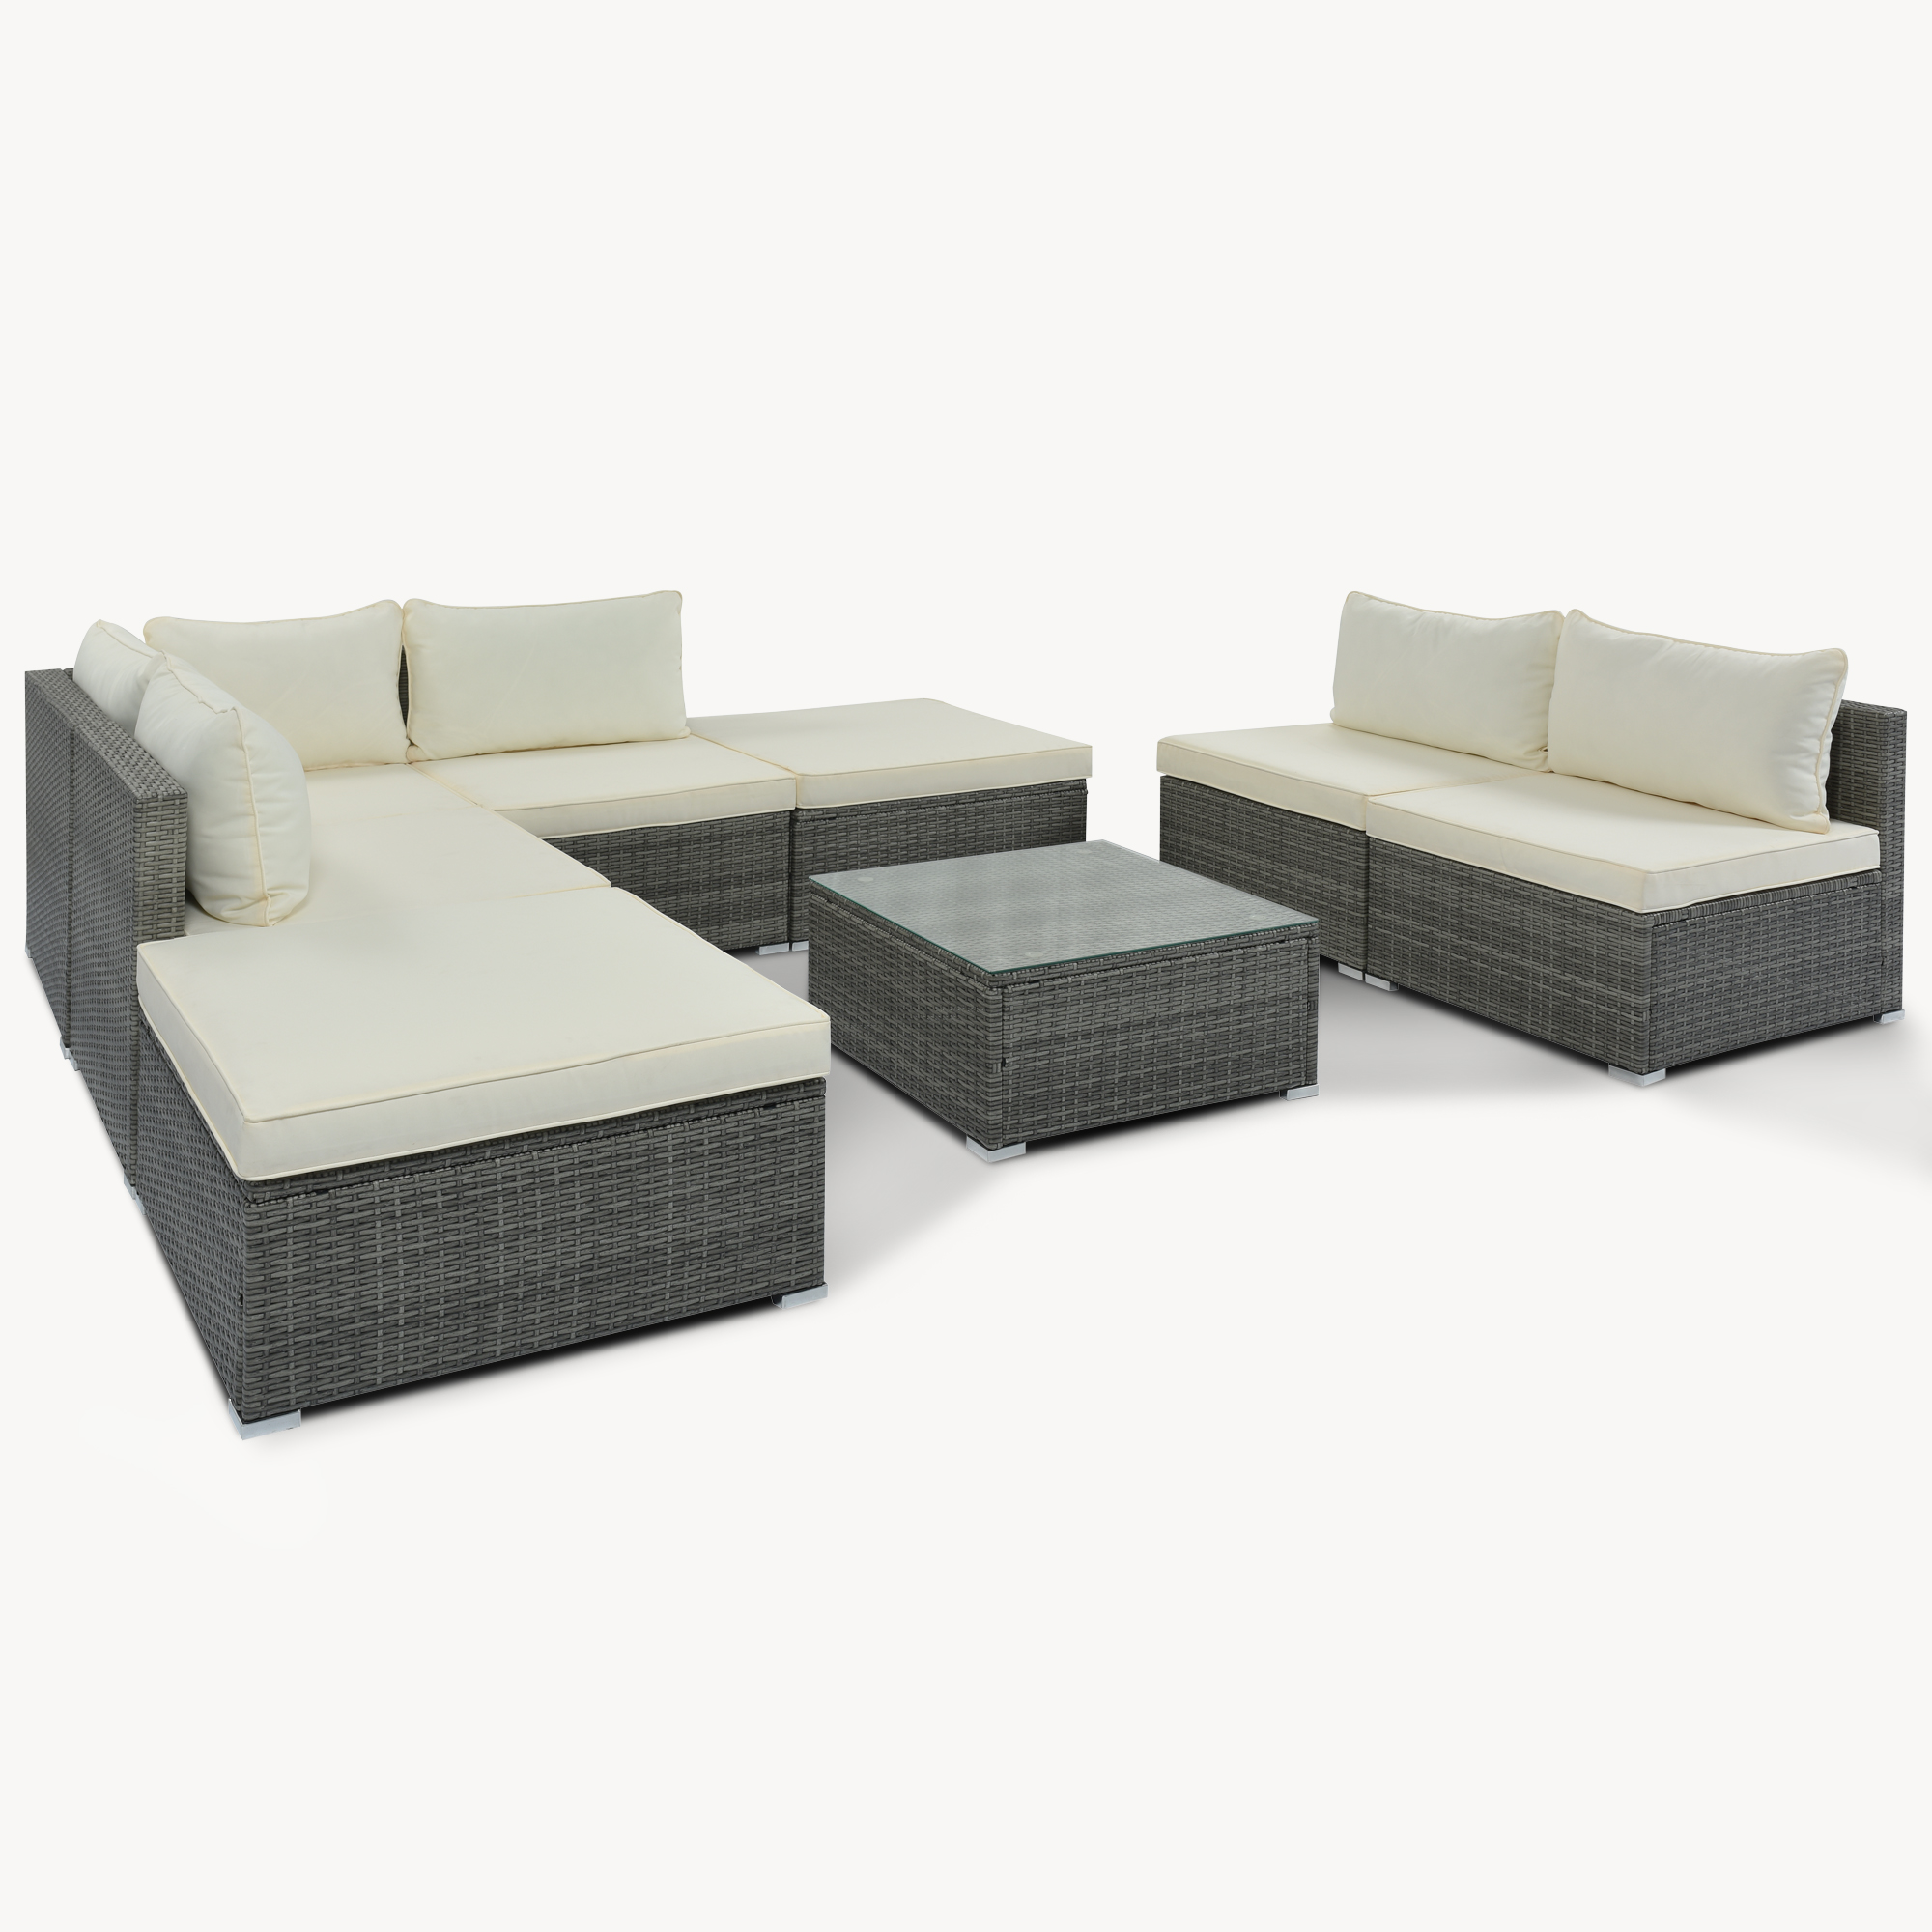 L-Shaped 8-Pieces Outdoor Patio Furniture Sets - FG201217AAA